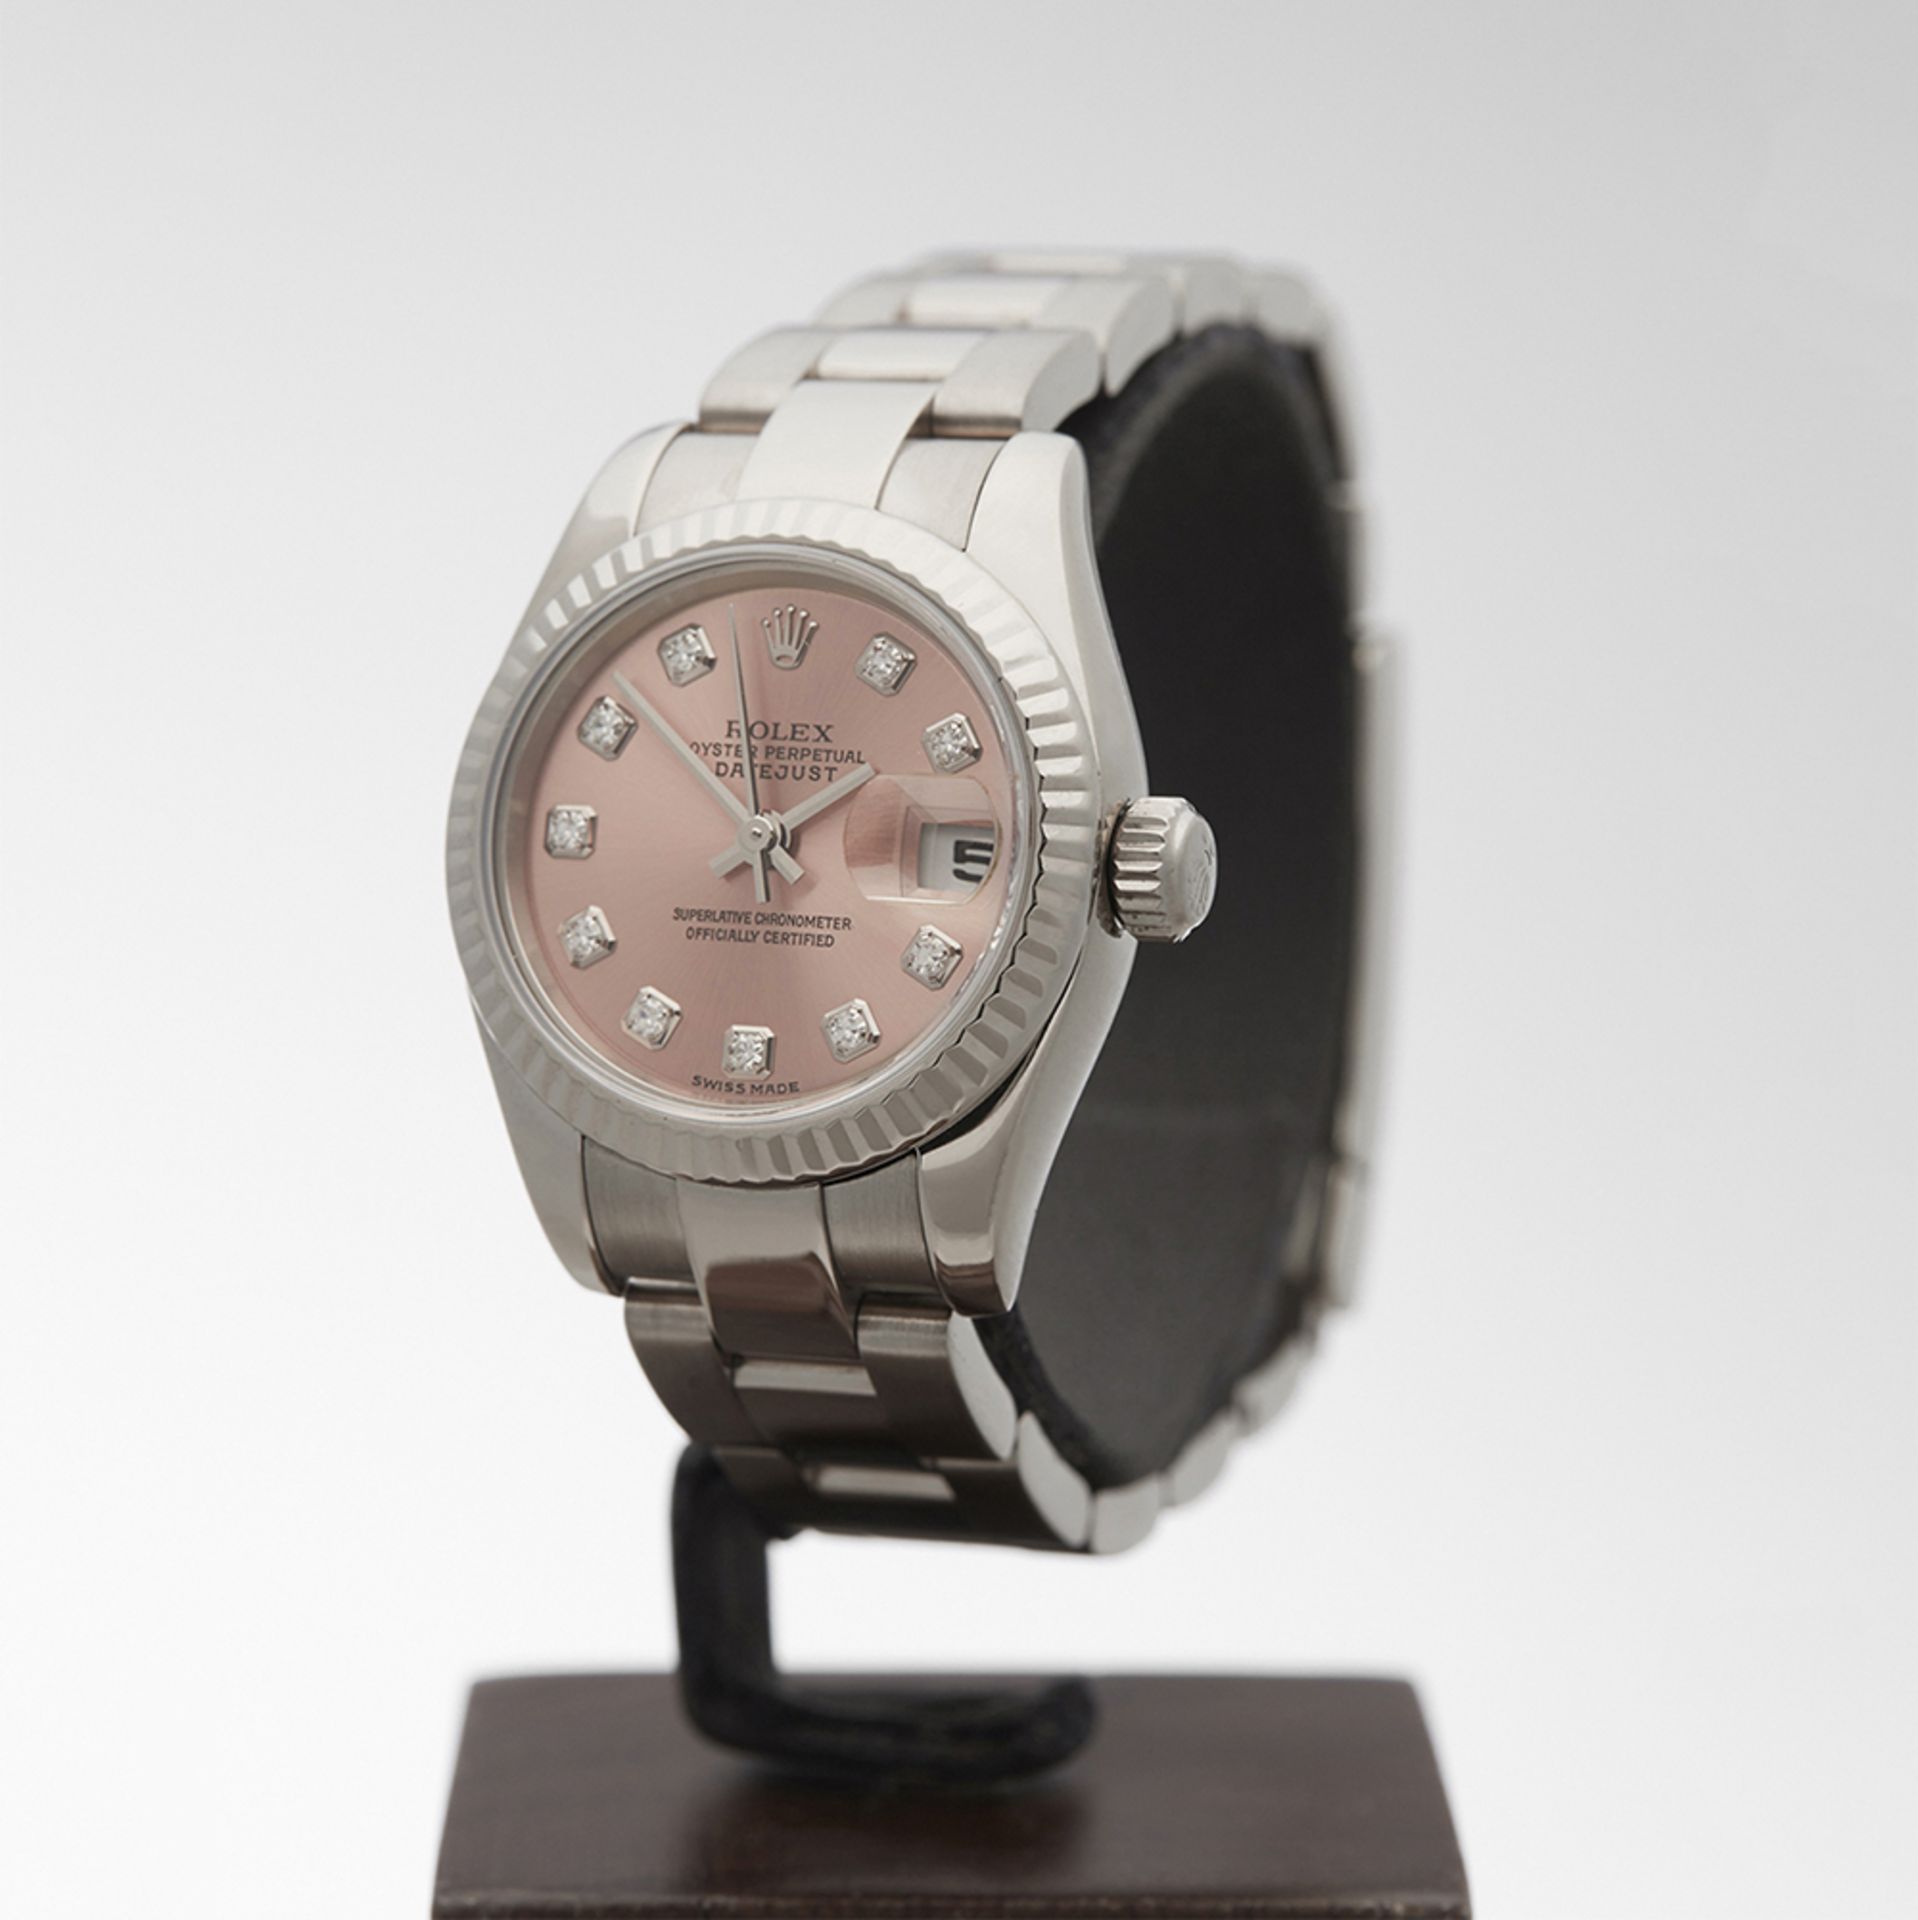 Rolex, Datejust 26mm 18k White Gold 179179 - Image 3 of 9